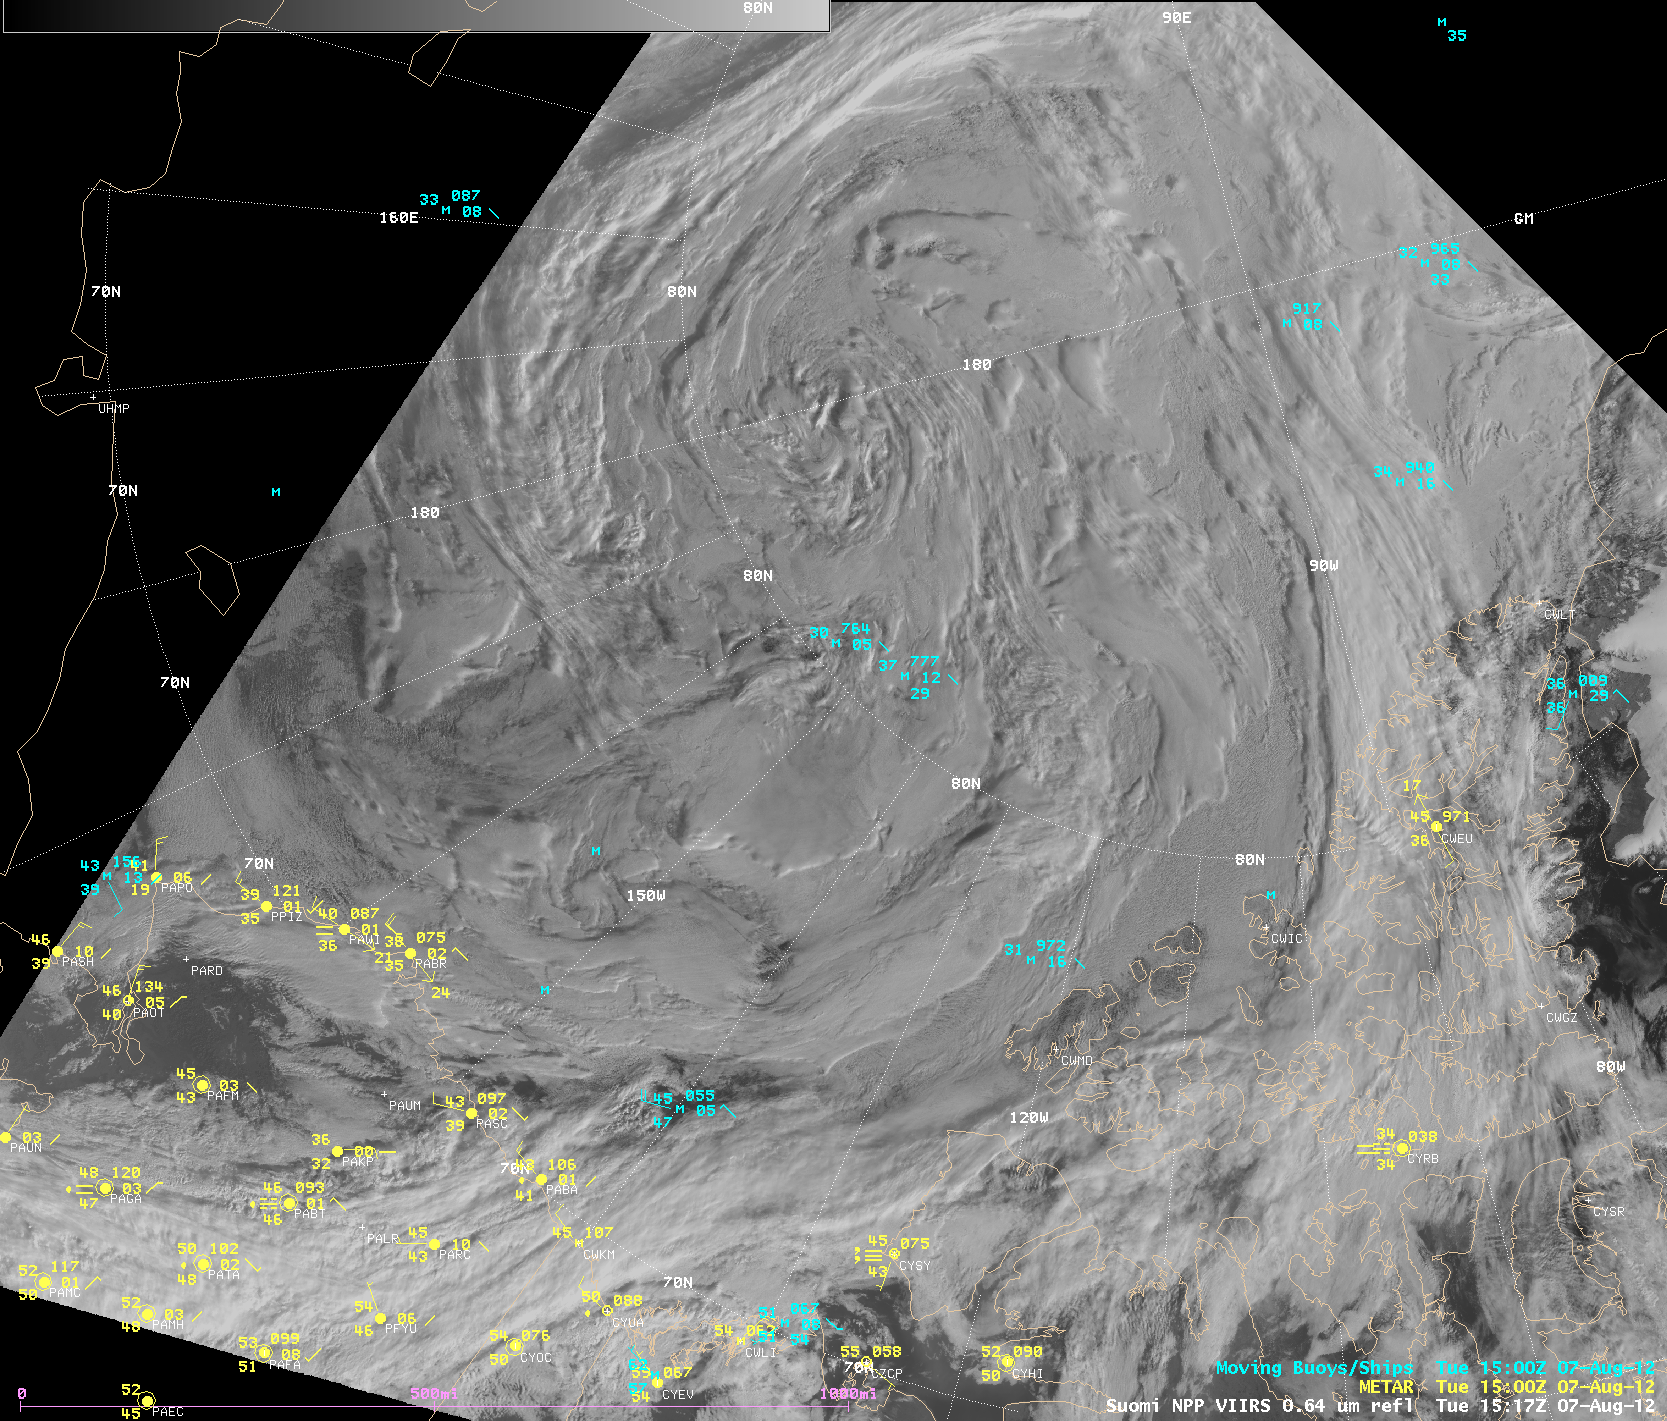 Suomi NPP VIIRS 0.64 Âµm visible channel images (click image to play animation)